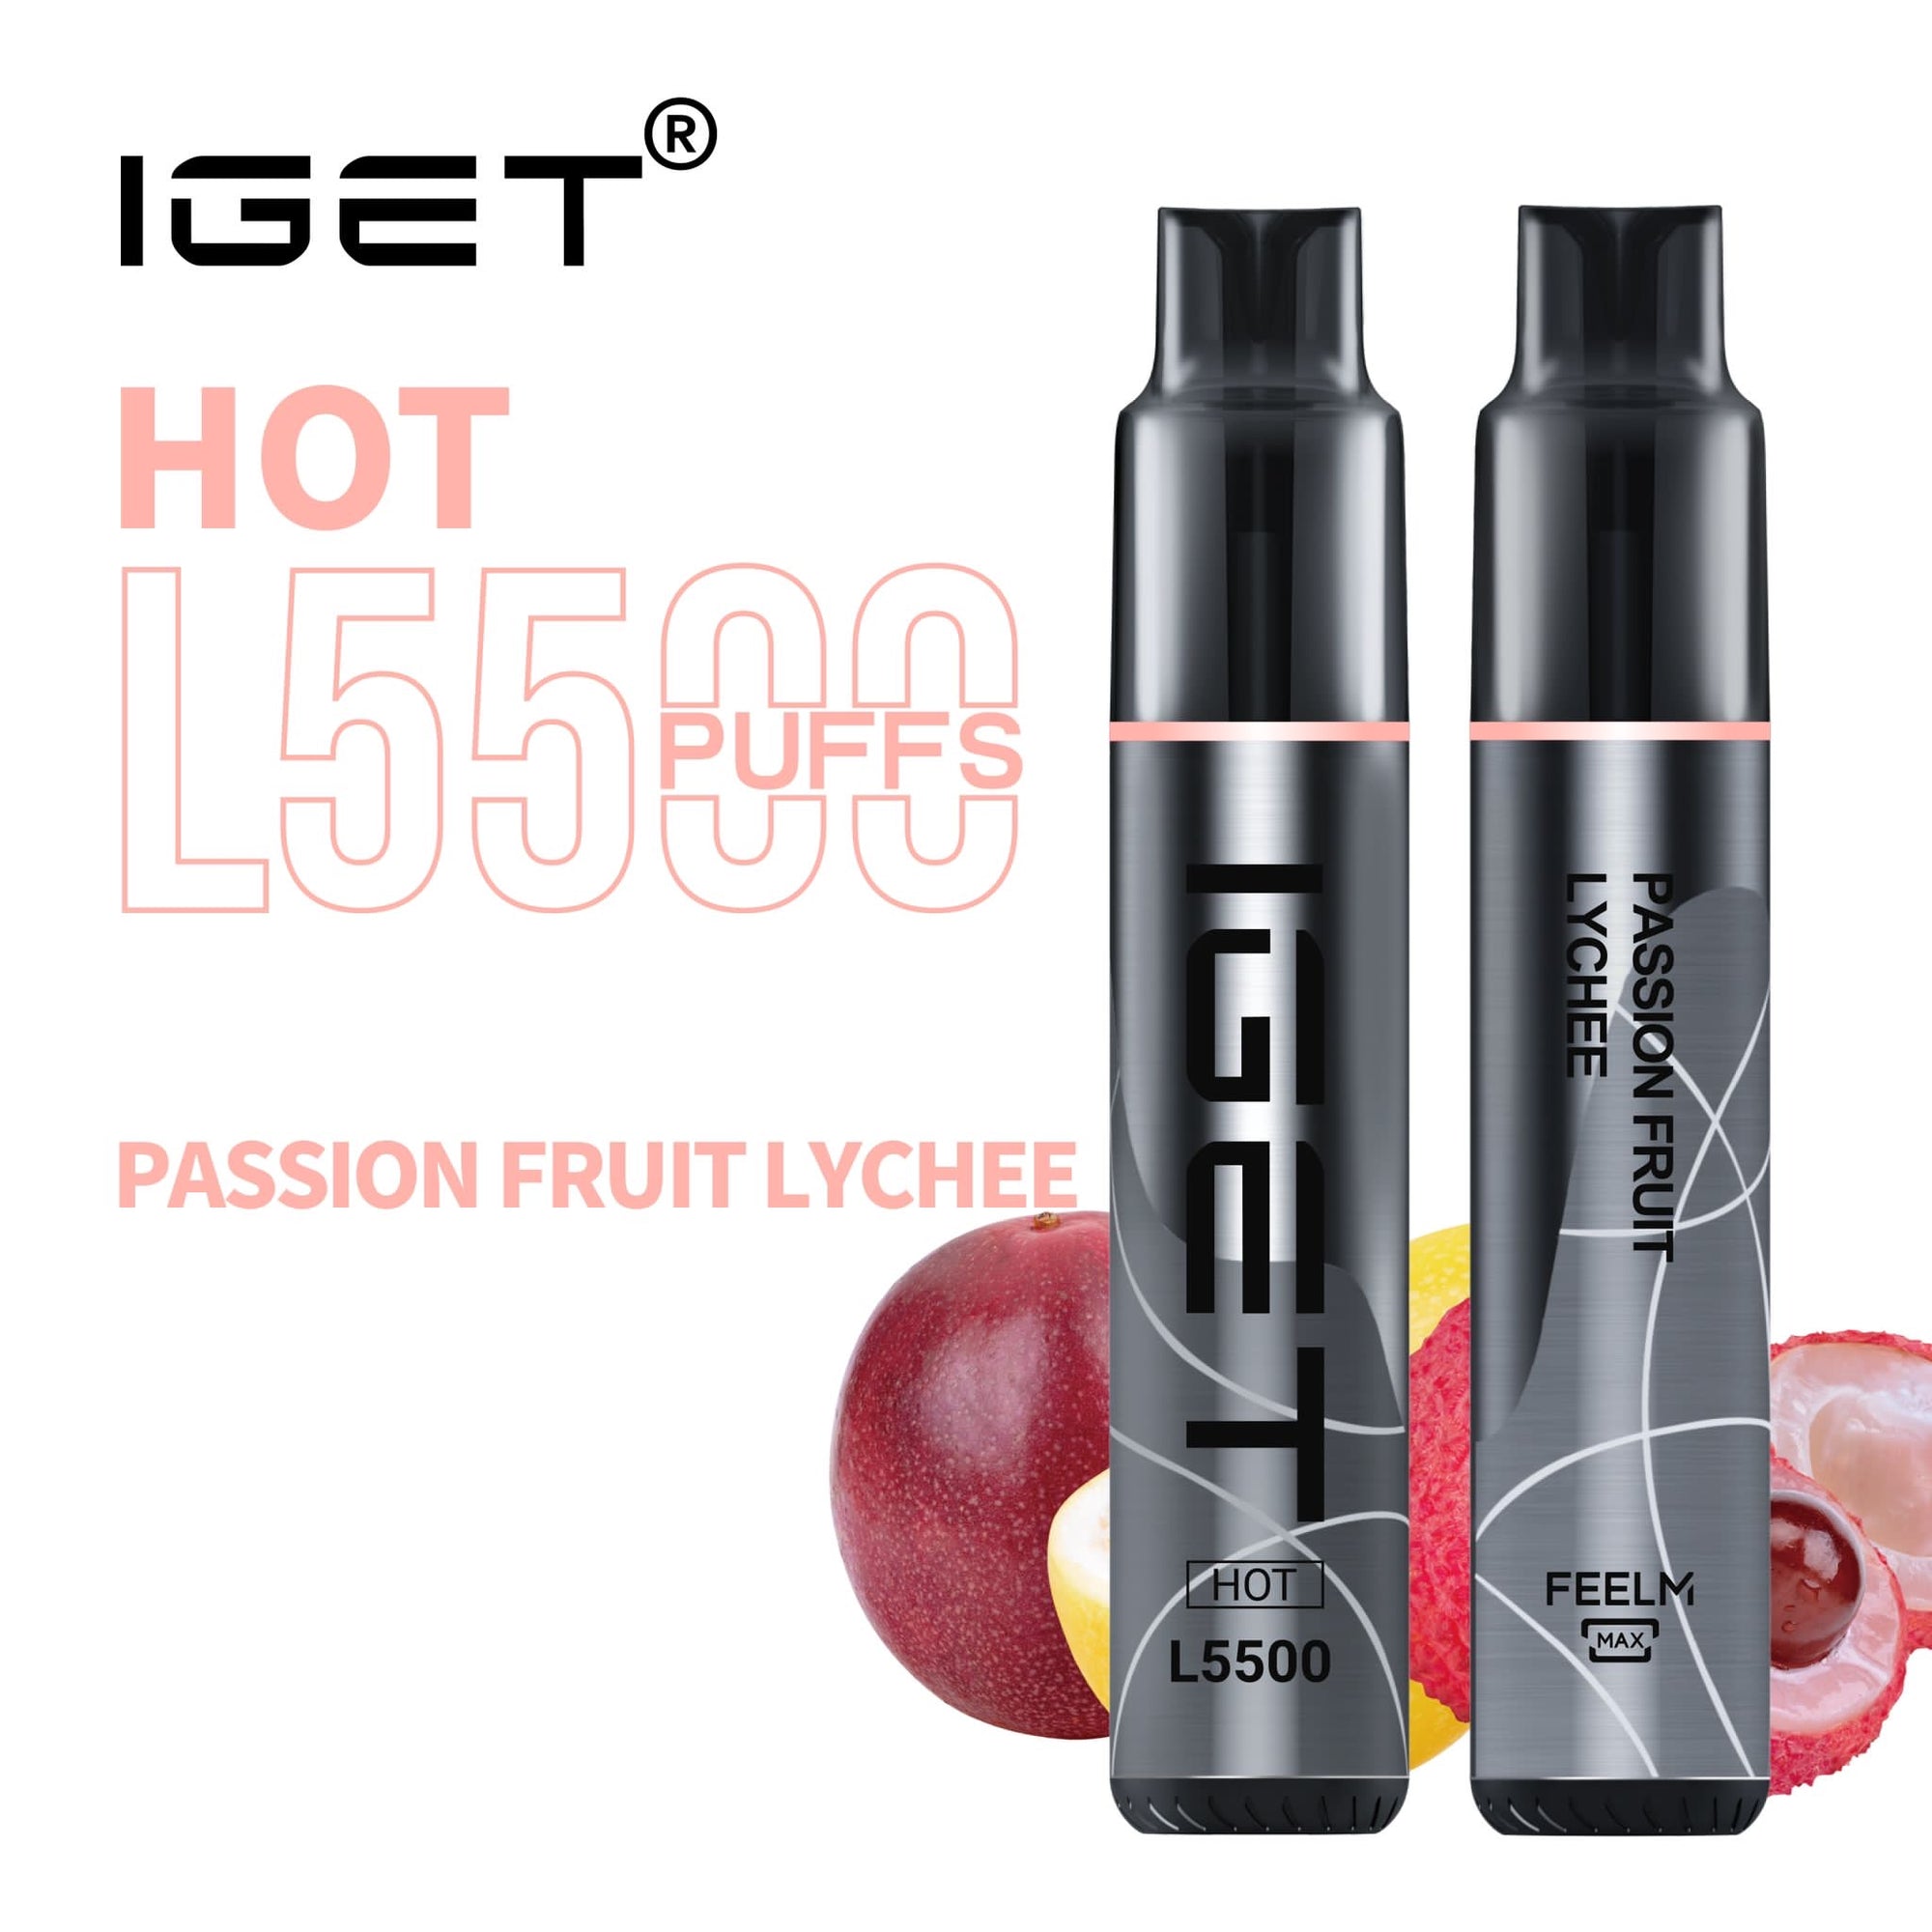 IGET HOT PASSION FRUIT LYCHEE 5500 PUFFS